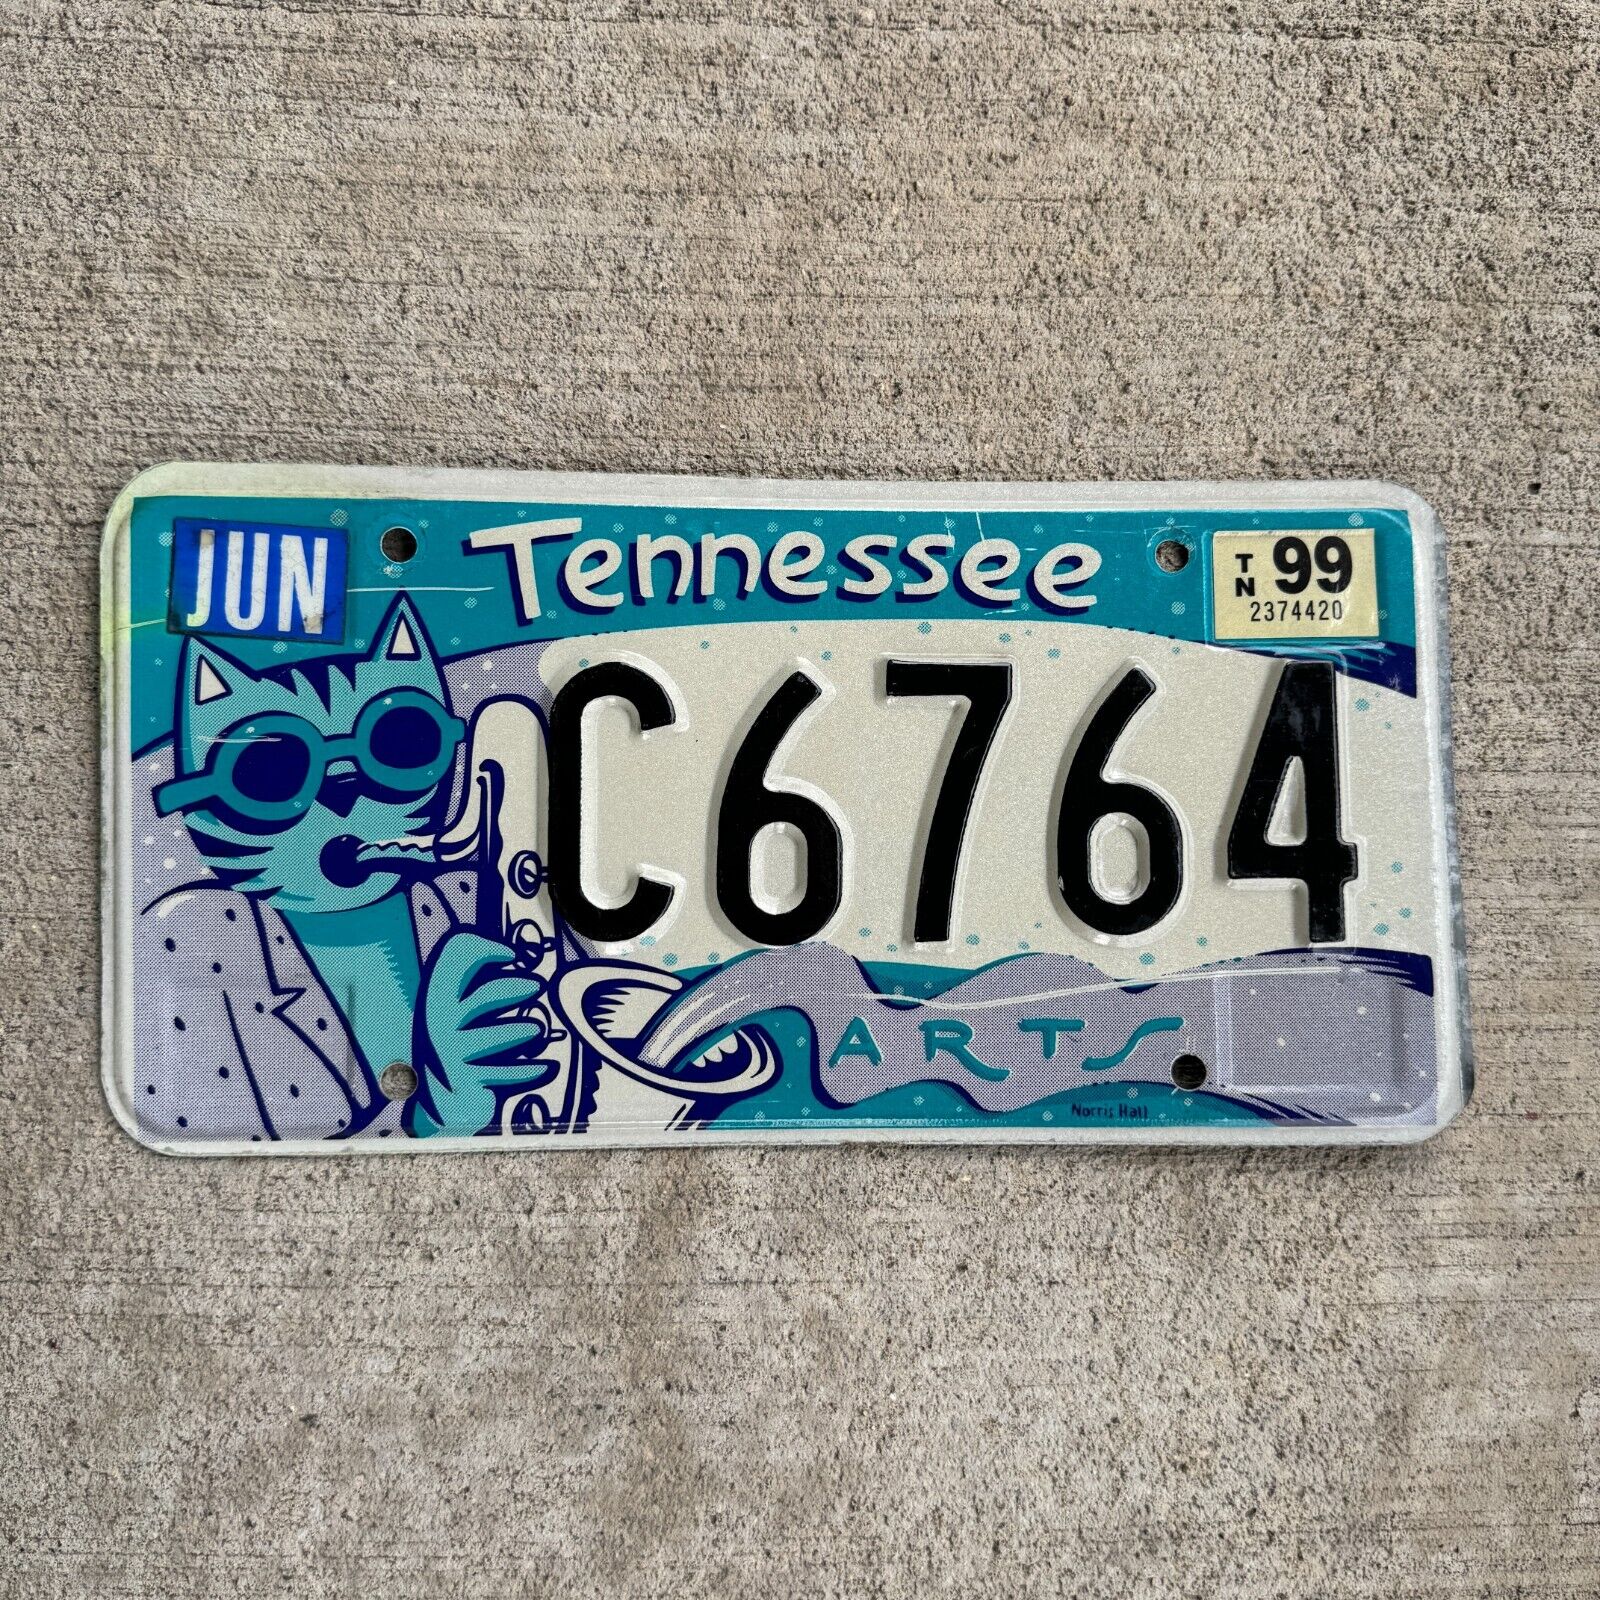 1999 Tennessee Arts License Plate Jazz Cat Cool Jazzy Music Feline Cats TN C6764